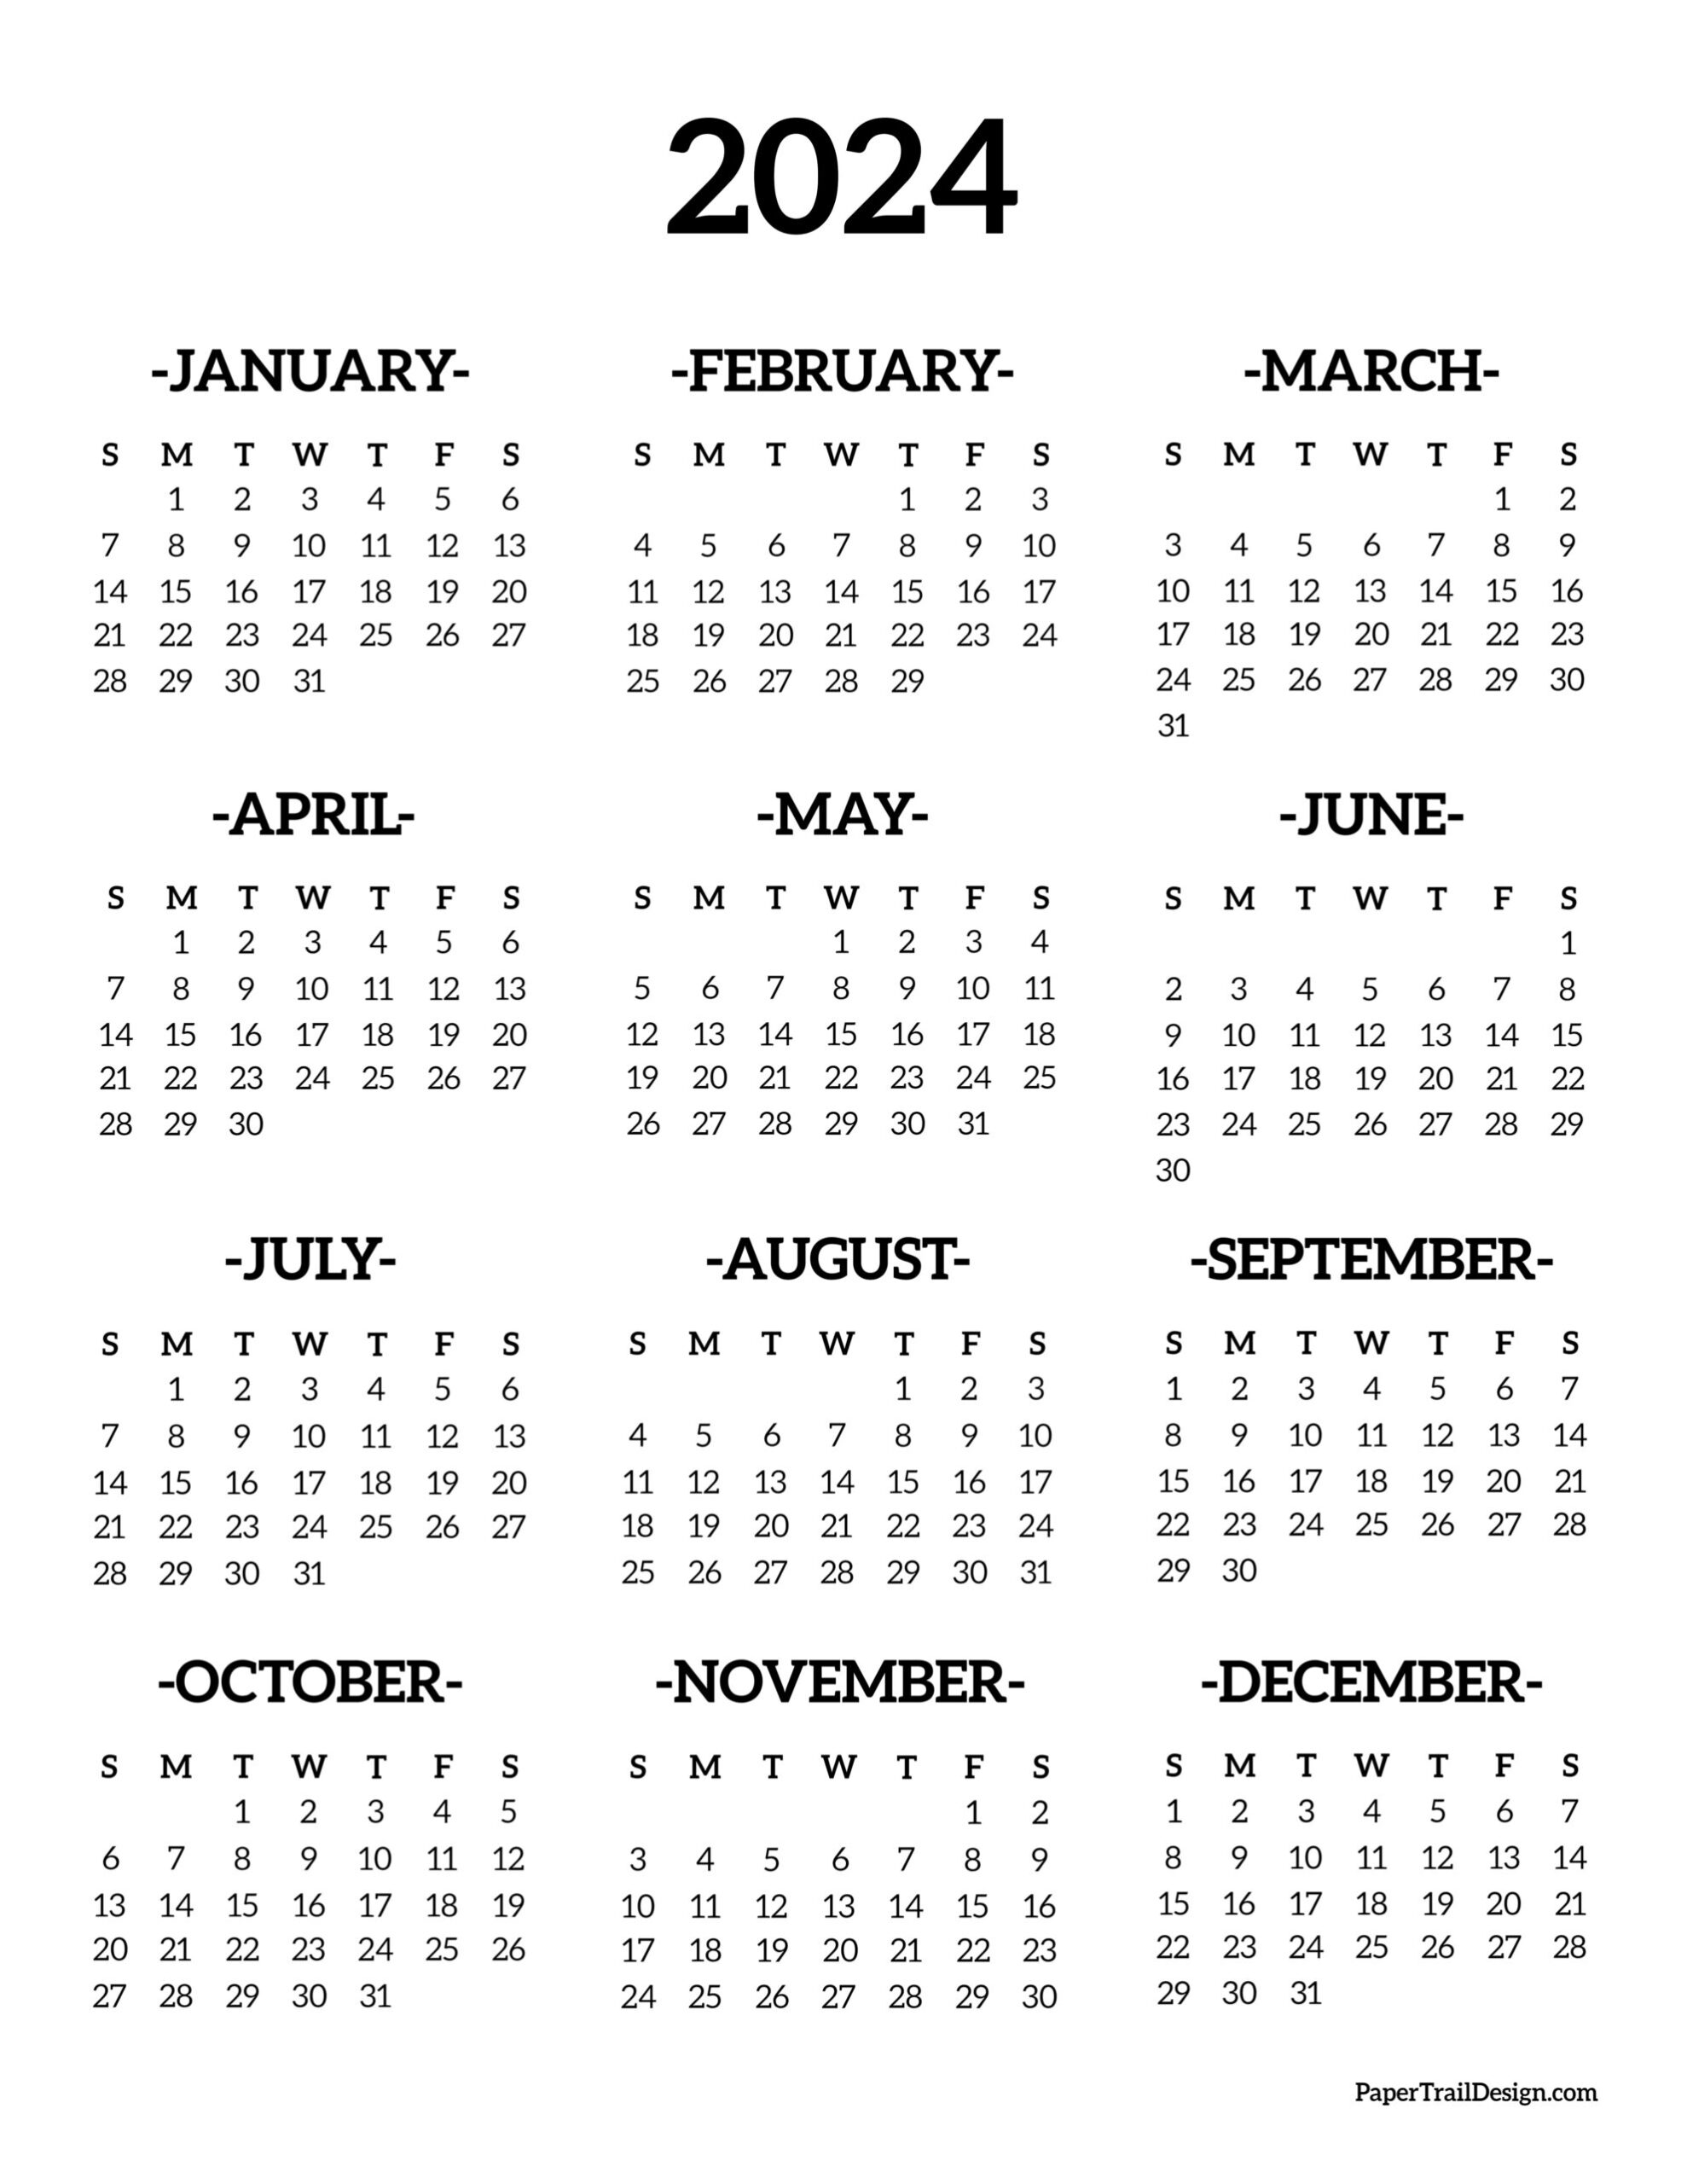 Calendar 2024 Printable One Page - Paper Trail Design for Free Printable Yearly Calendar 2024 One Page